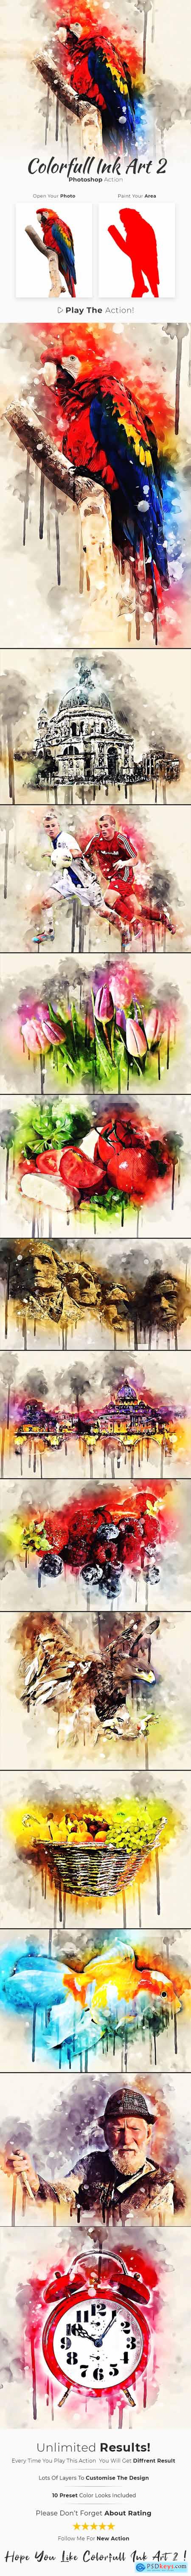 Graphicriver Colorfull Ink Art 2 - Photoshop Action